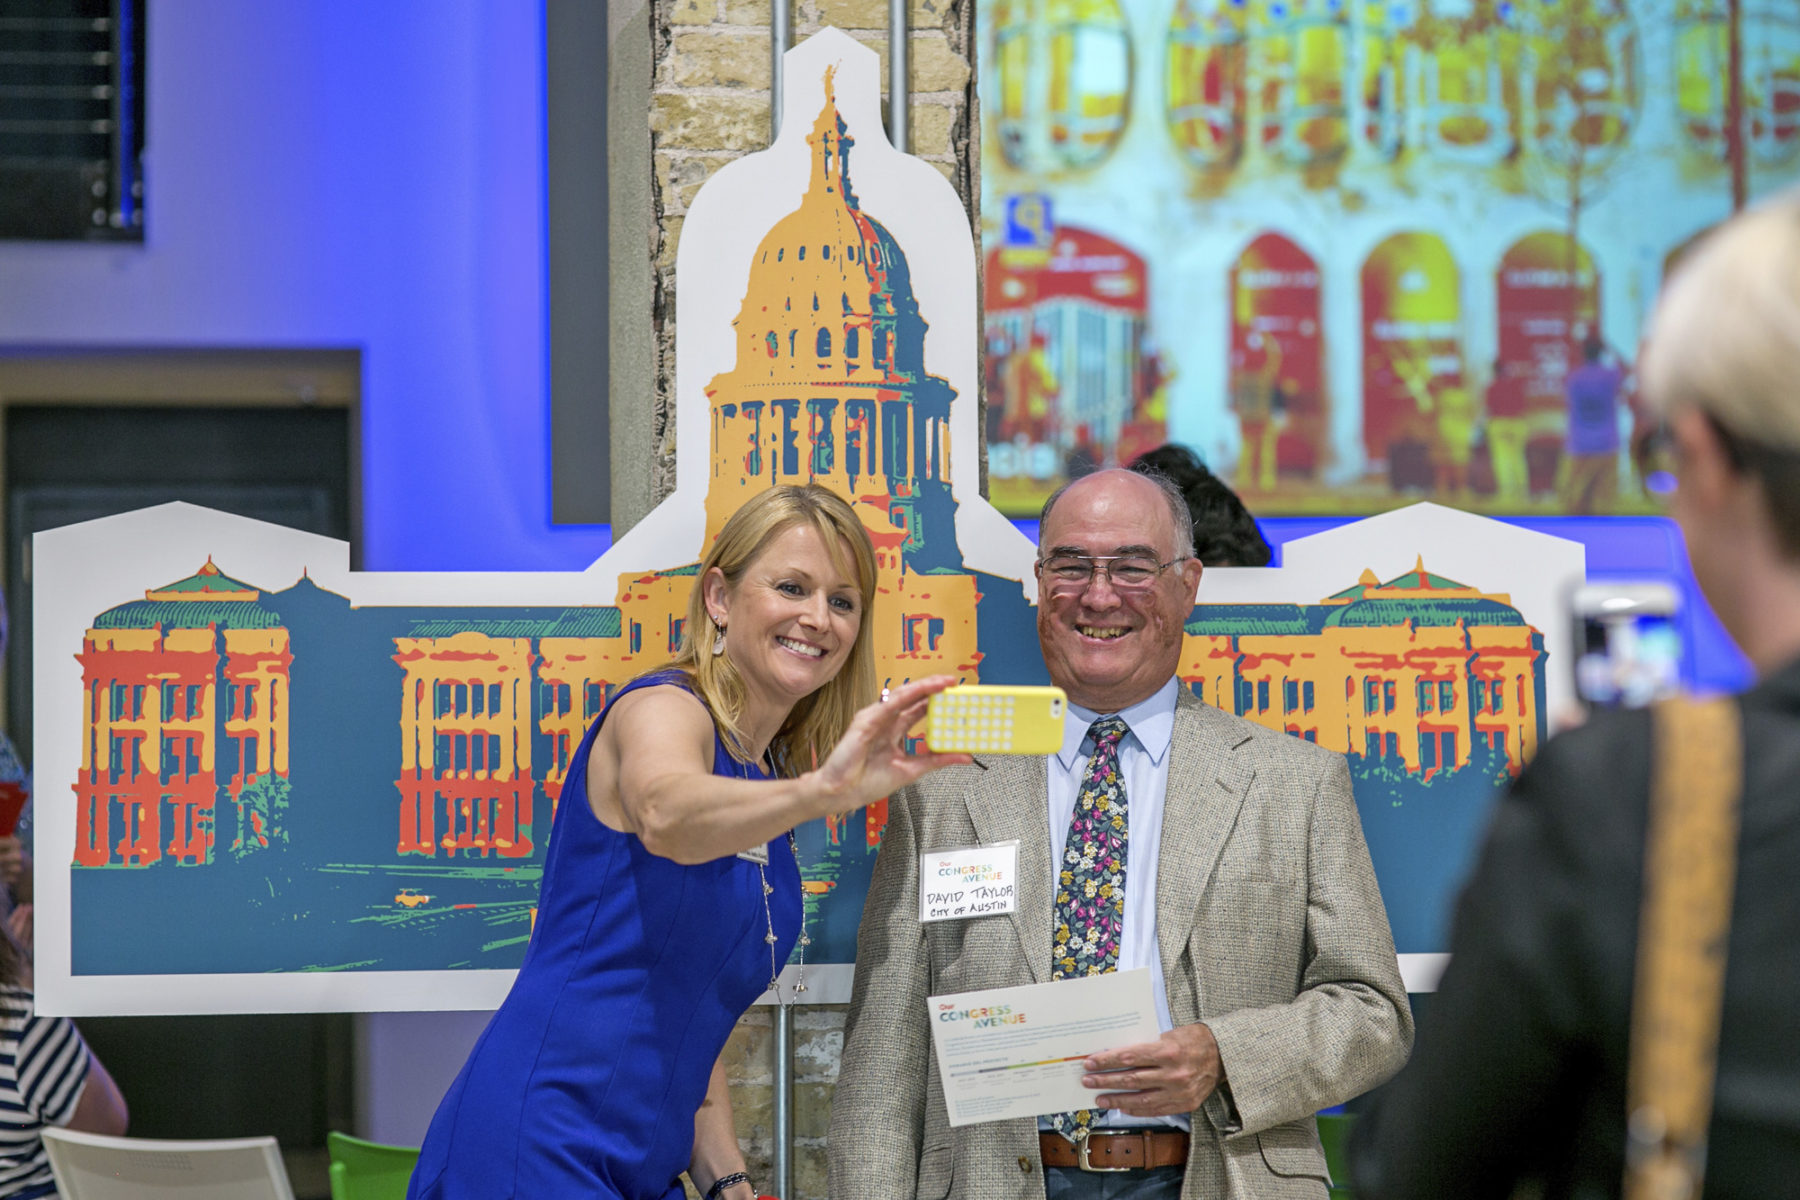 photo of a woman in a blue dress taking a selfie on a yellow phone with a bald man in a suit jacket and tie. They are standing in front of a rendered print out of the Texas State Capitol building.